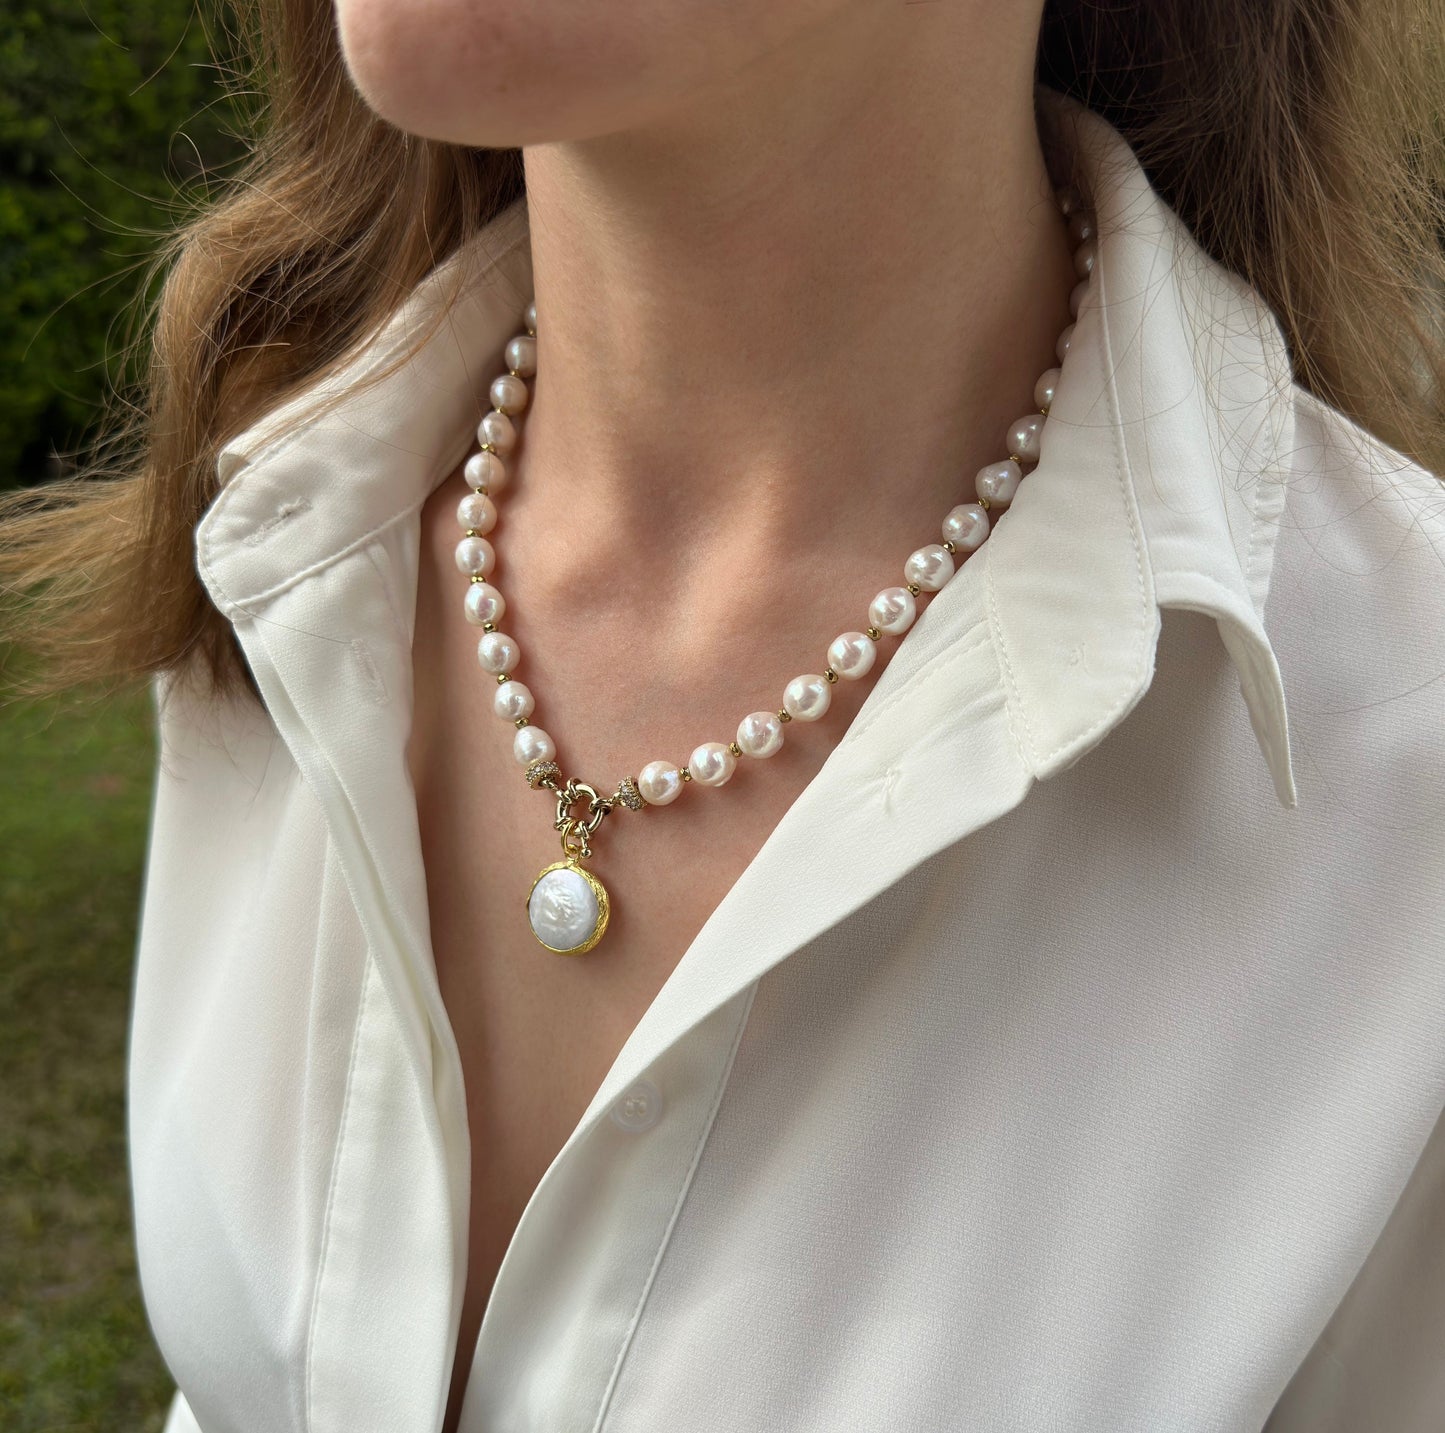 Pearl Jewelry, Pearl Necklace and Earrings for Women, Handmade Freshwater Pearl for Birthday Gifts, Chic Jewelry